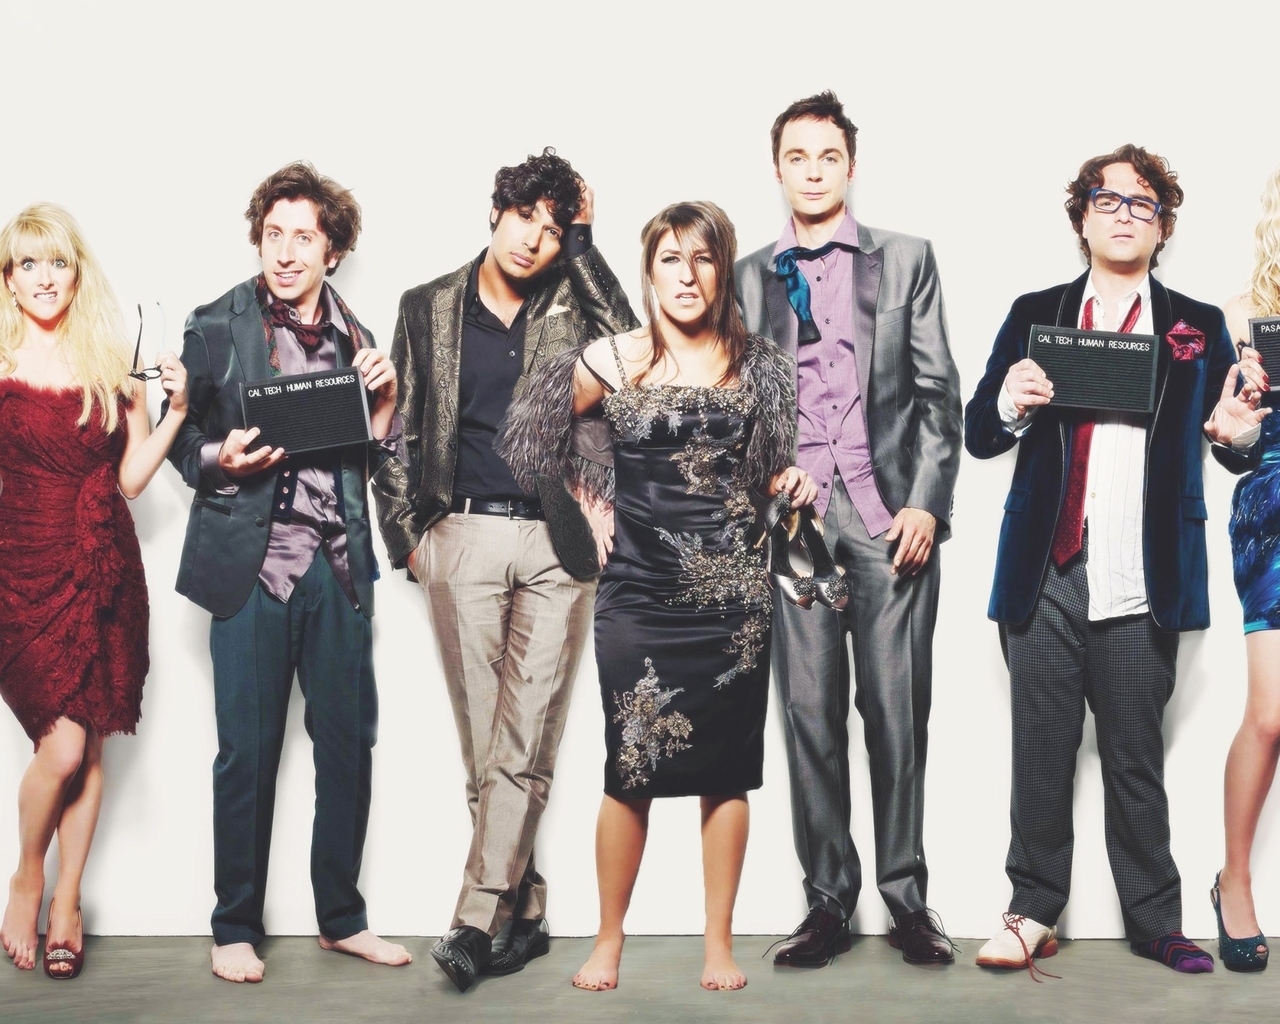 The Big Bang Theory Cast for 1280 x 1024 resolution